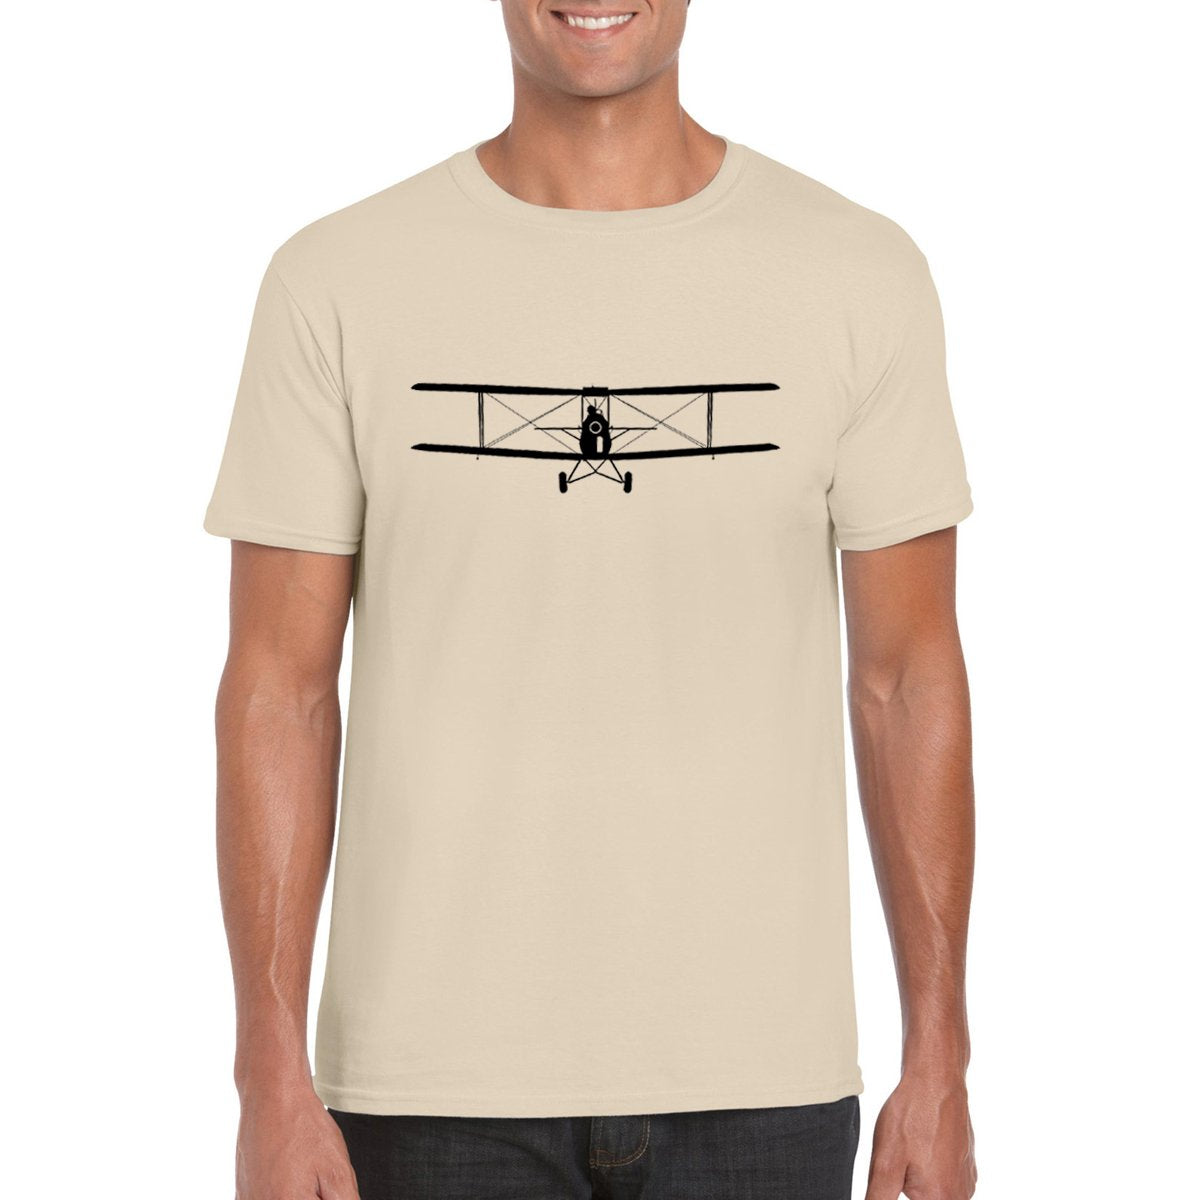 TIGERMOTH Unisex Semi-Fitted T-Shirt